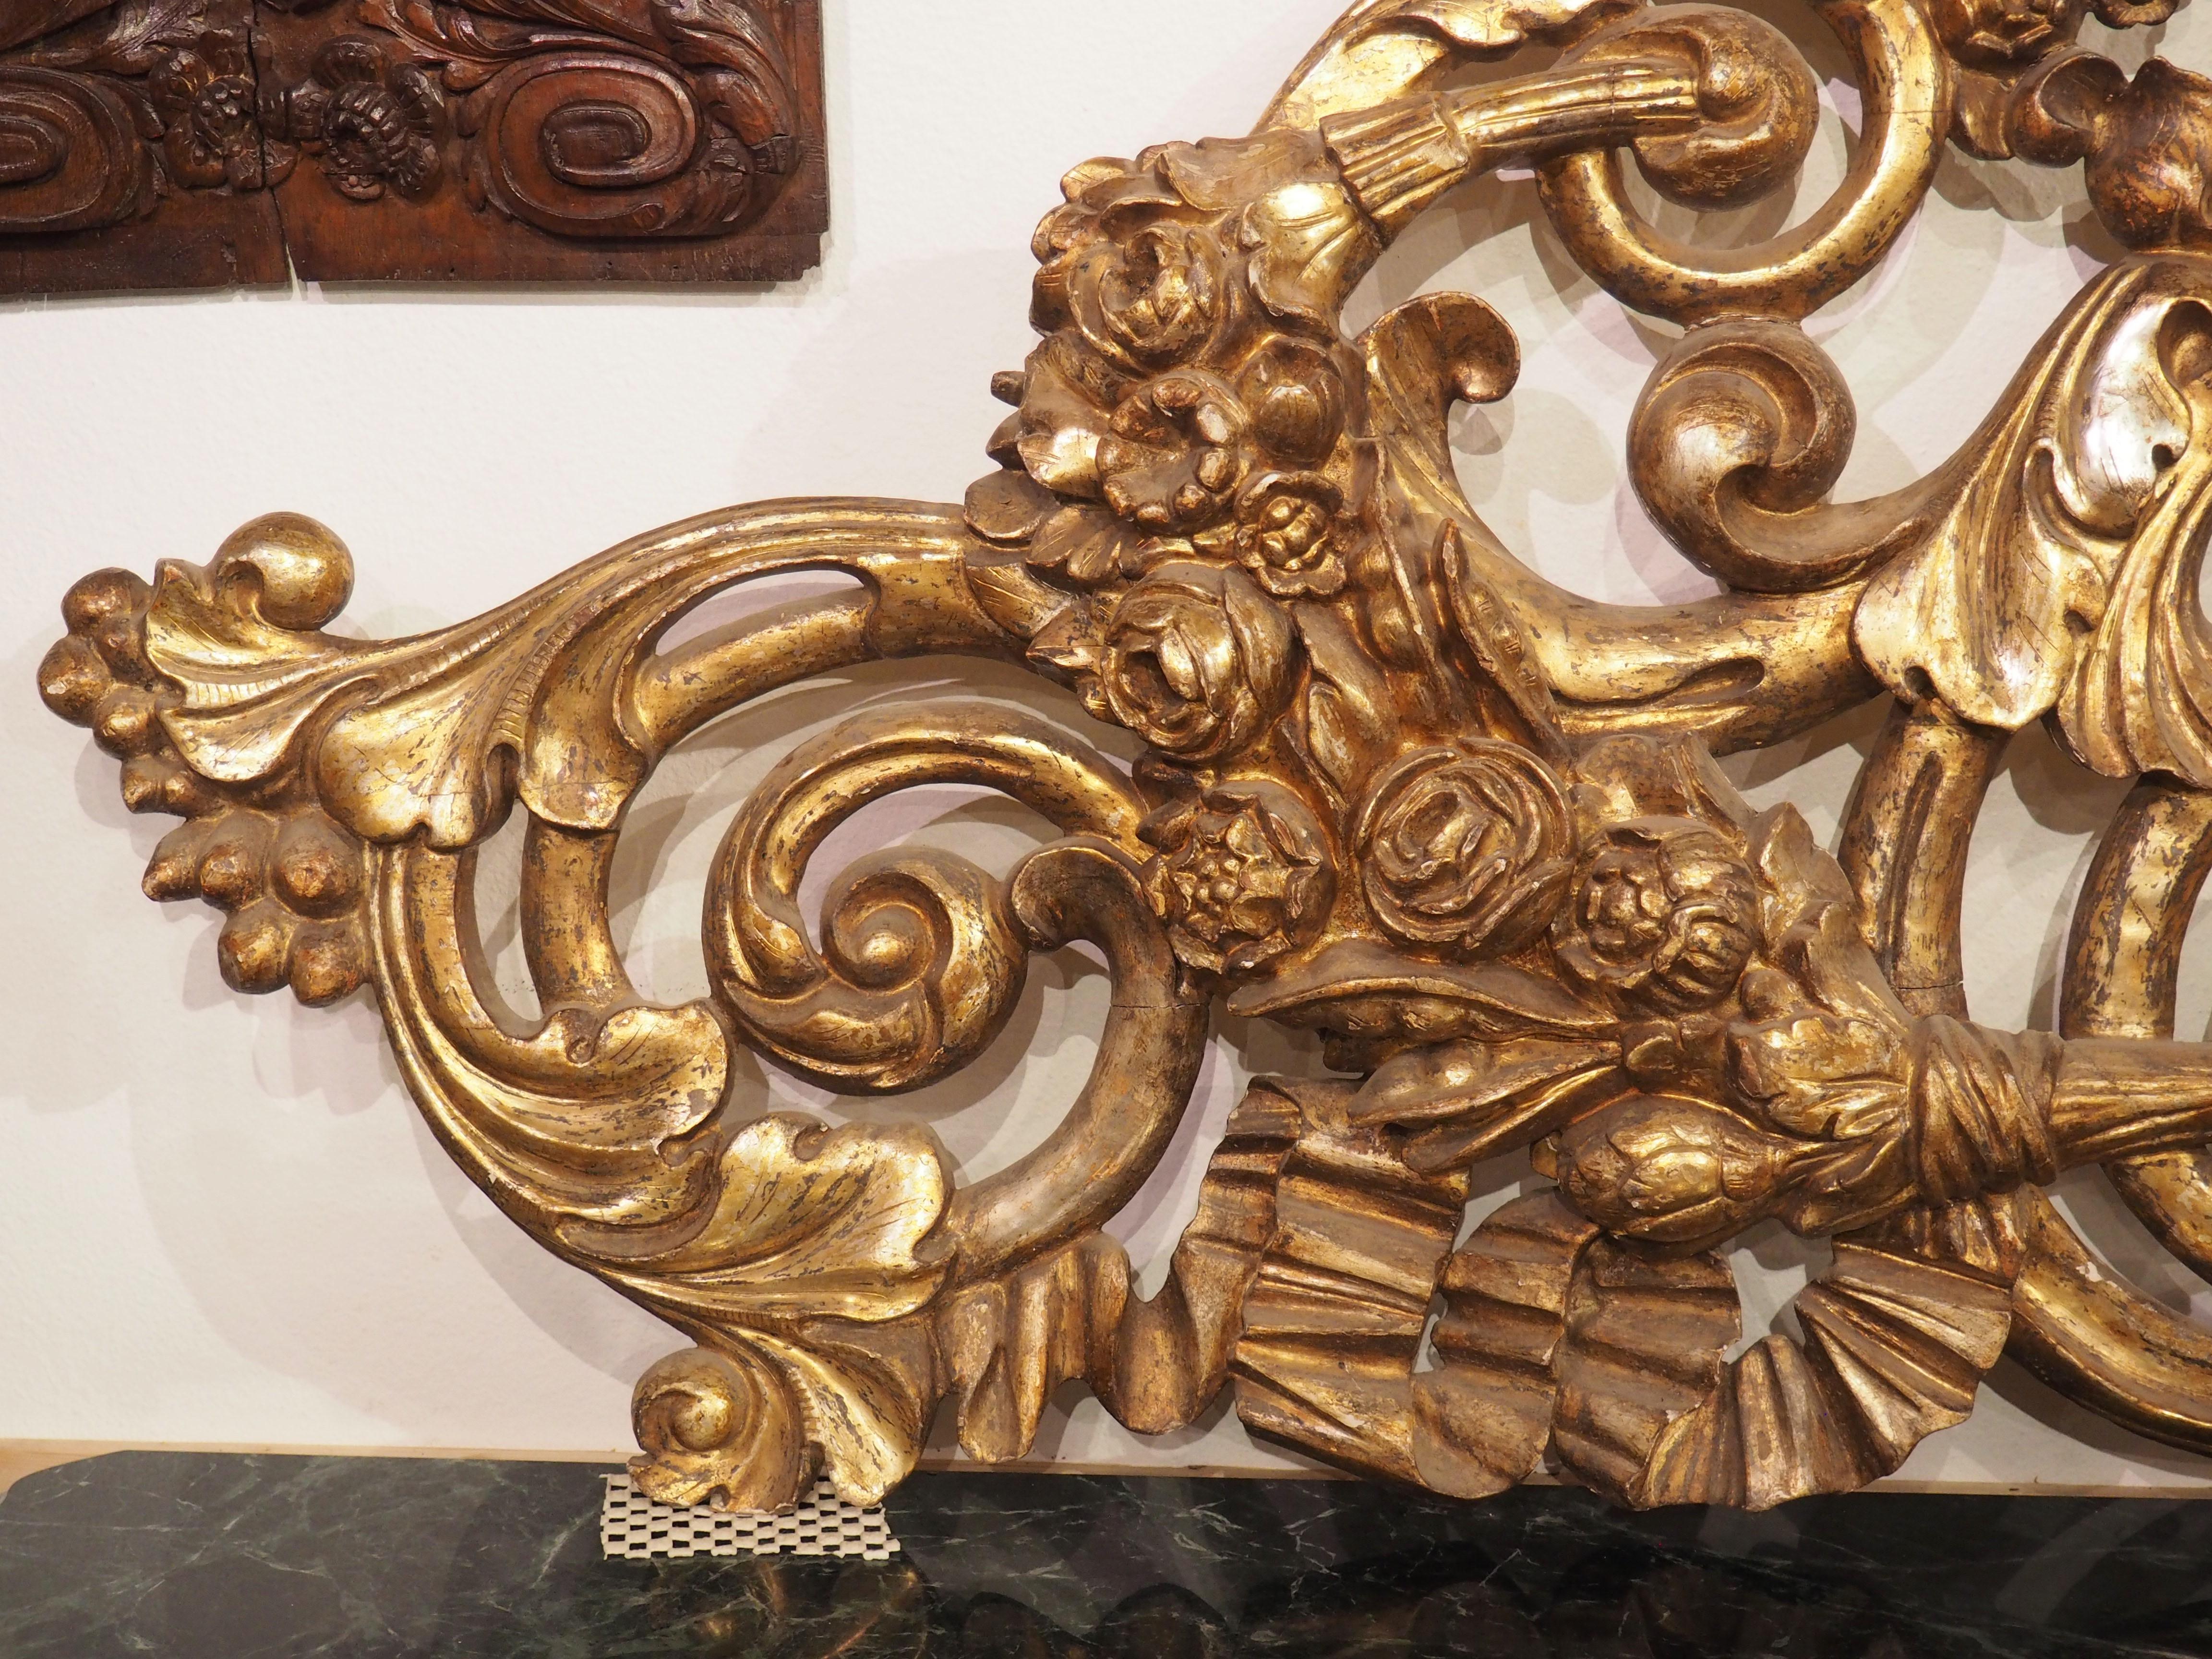 Hand-Carved Large Circa 1850 Italian Giltwood Architectural Carving or Headboard 91.5 Inches For Sale